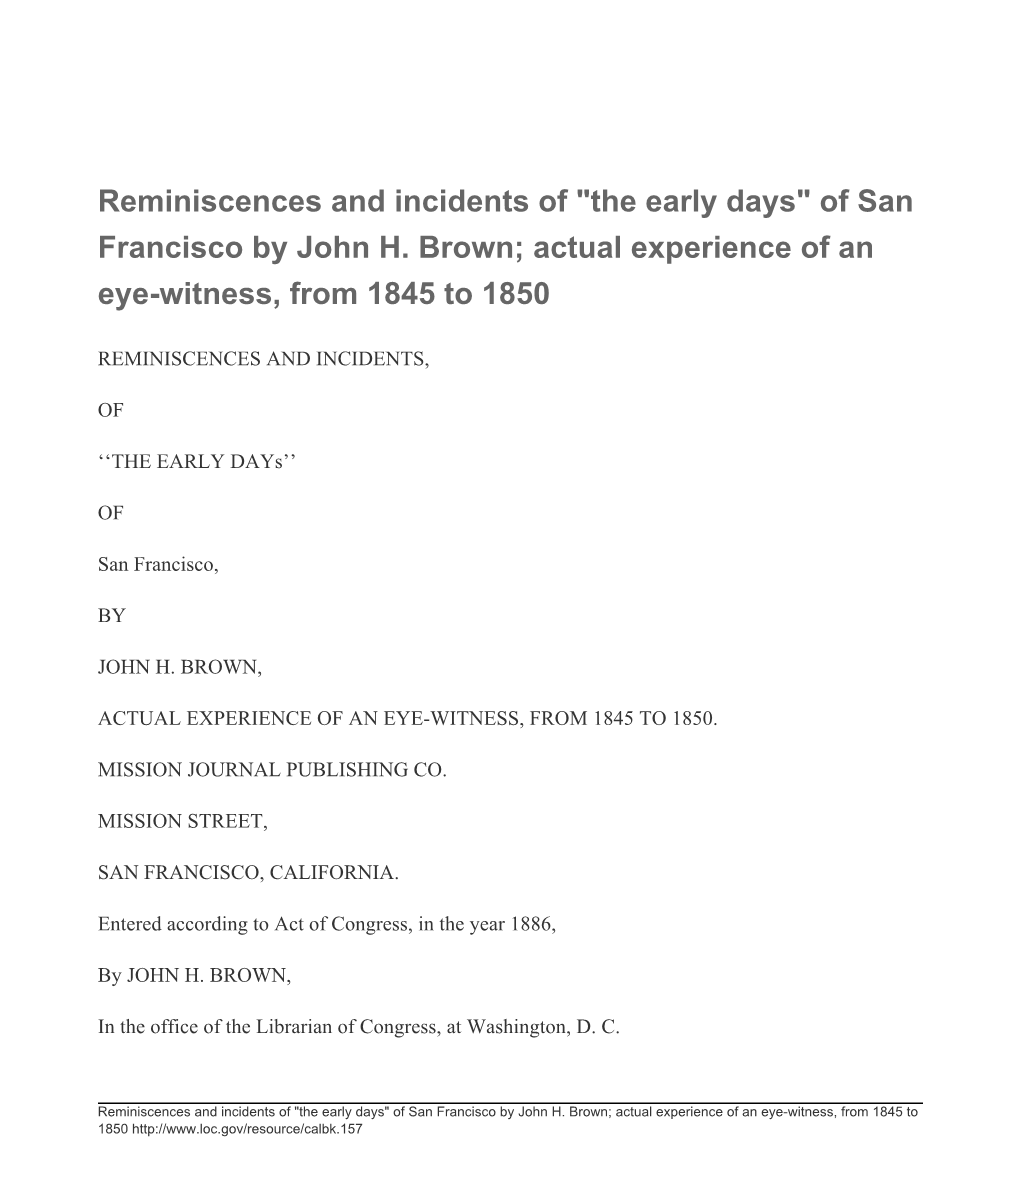 Of San Francisco by John H. Brown; Actual Experience of an Eye-Witness, from 1845 to 1850